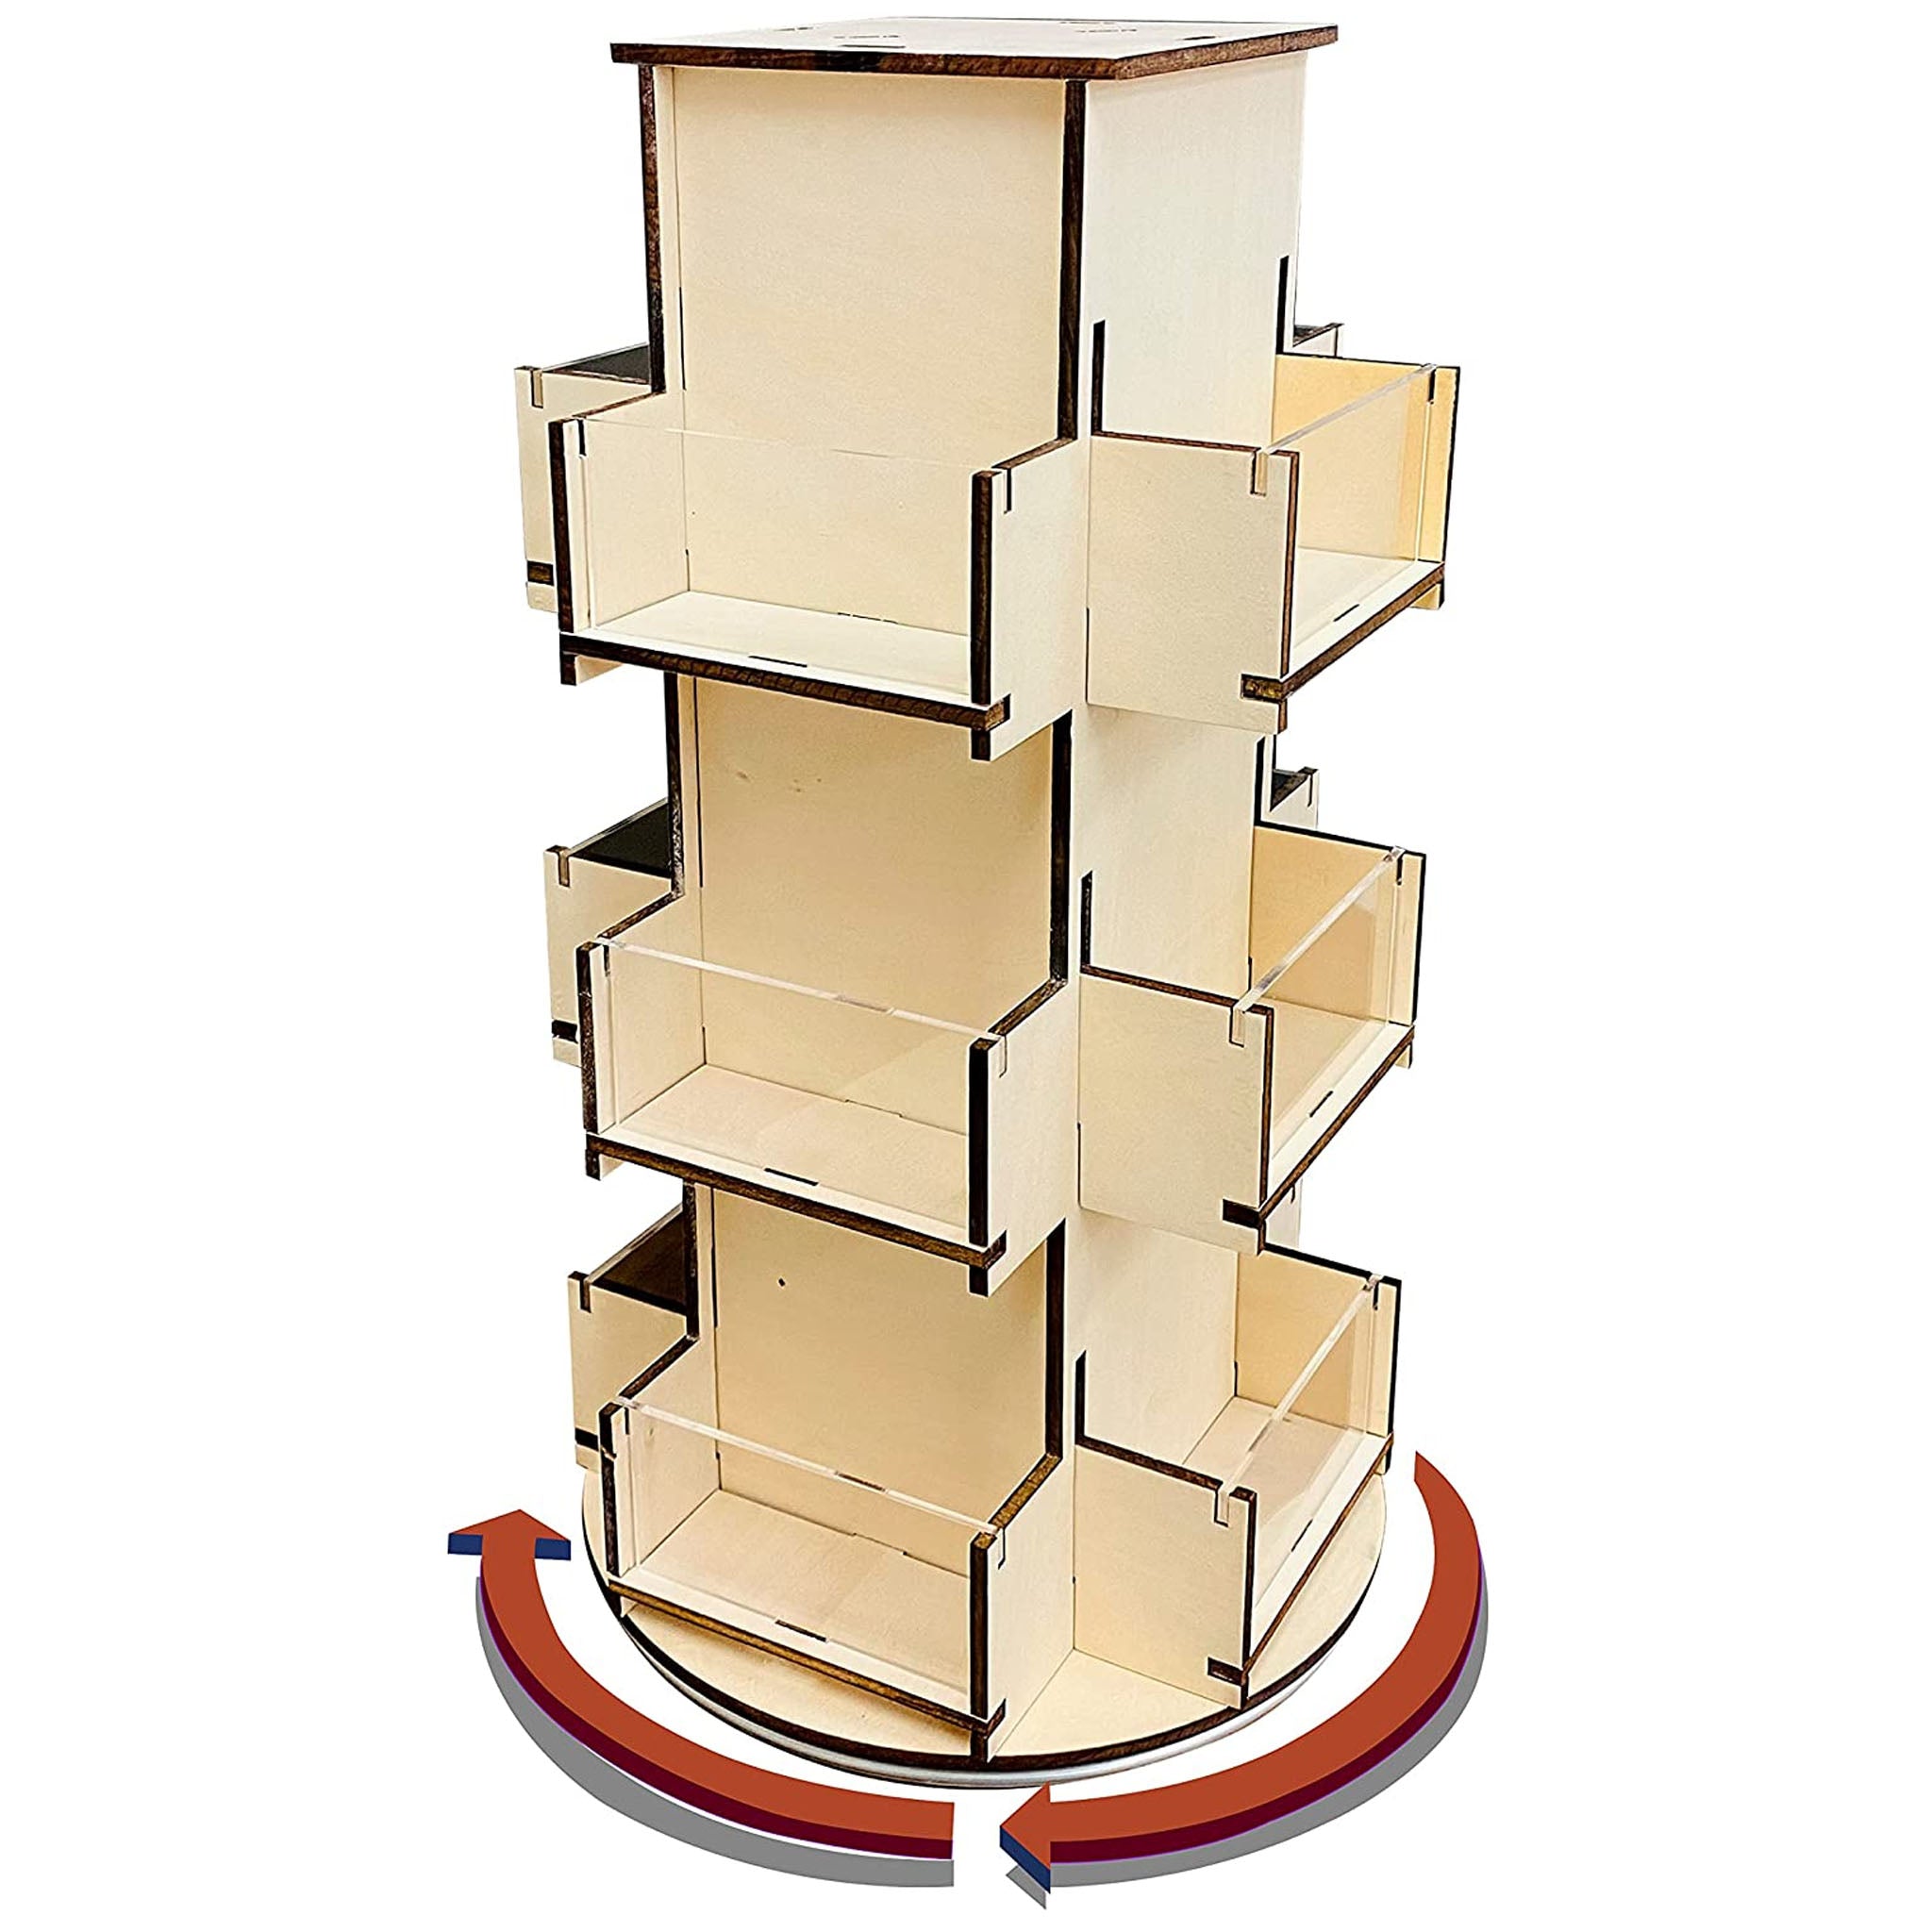 4-Sided Multi Level Rotating Display Stand - Great for Stickers